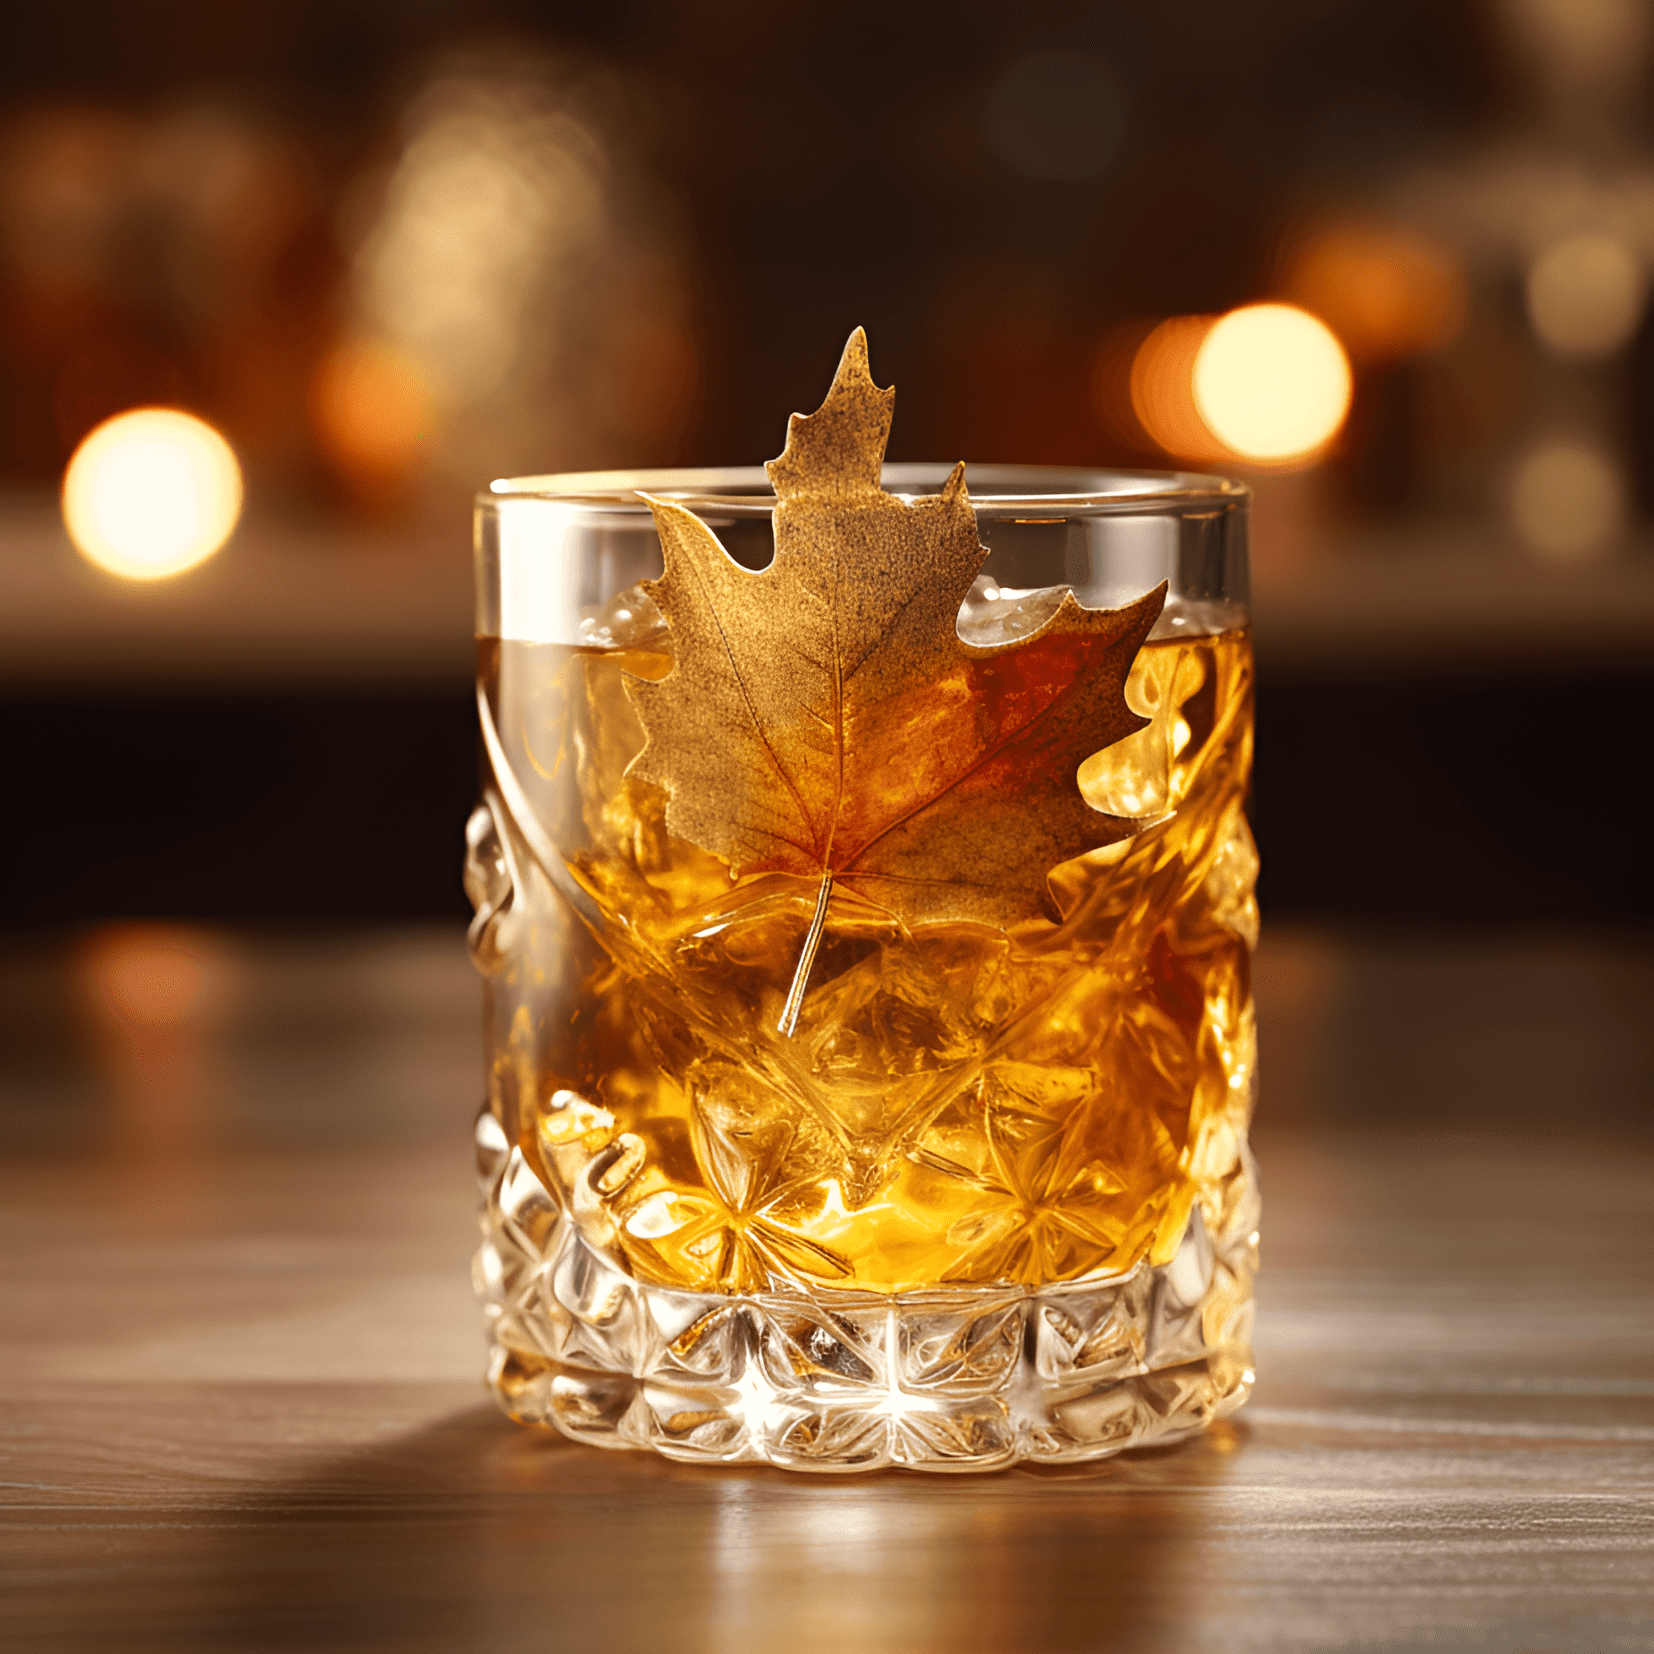 Maple Leaf Cocktail Recipe - The Maple Leaf cocktail is a well-balanced mix of sweet, sour, and strong flavors. The whiskey provides a robust, warming base, while the maple syrup adds a rich sweetness. The lemon juice brings a refreshing tartness, and the overall taste is smooth and satisfying.